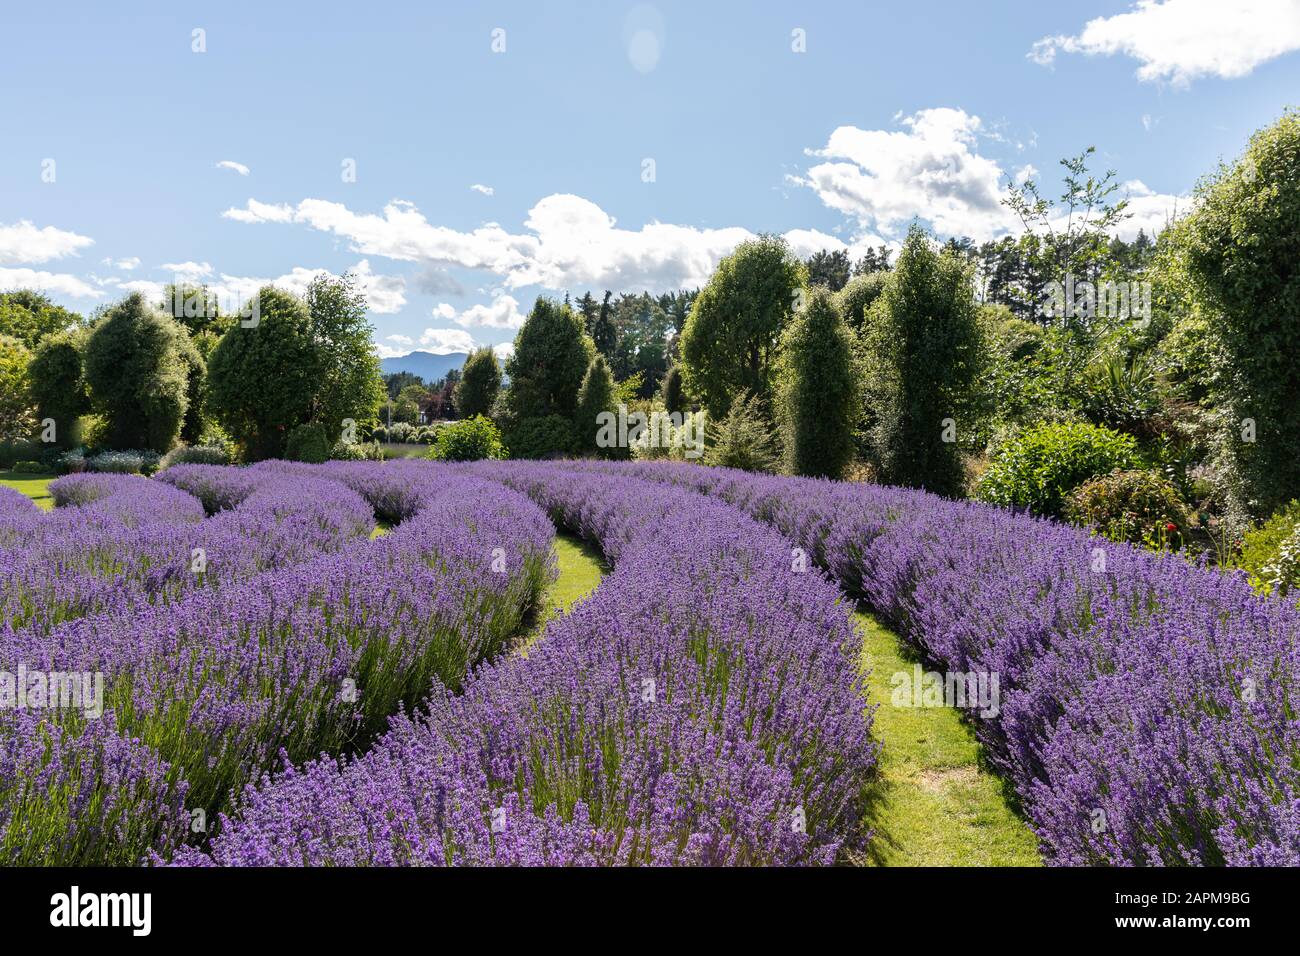 Curving rows of lavender at the Wanaka Lavender Farm, New Zealand Stock Photo